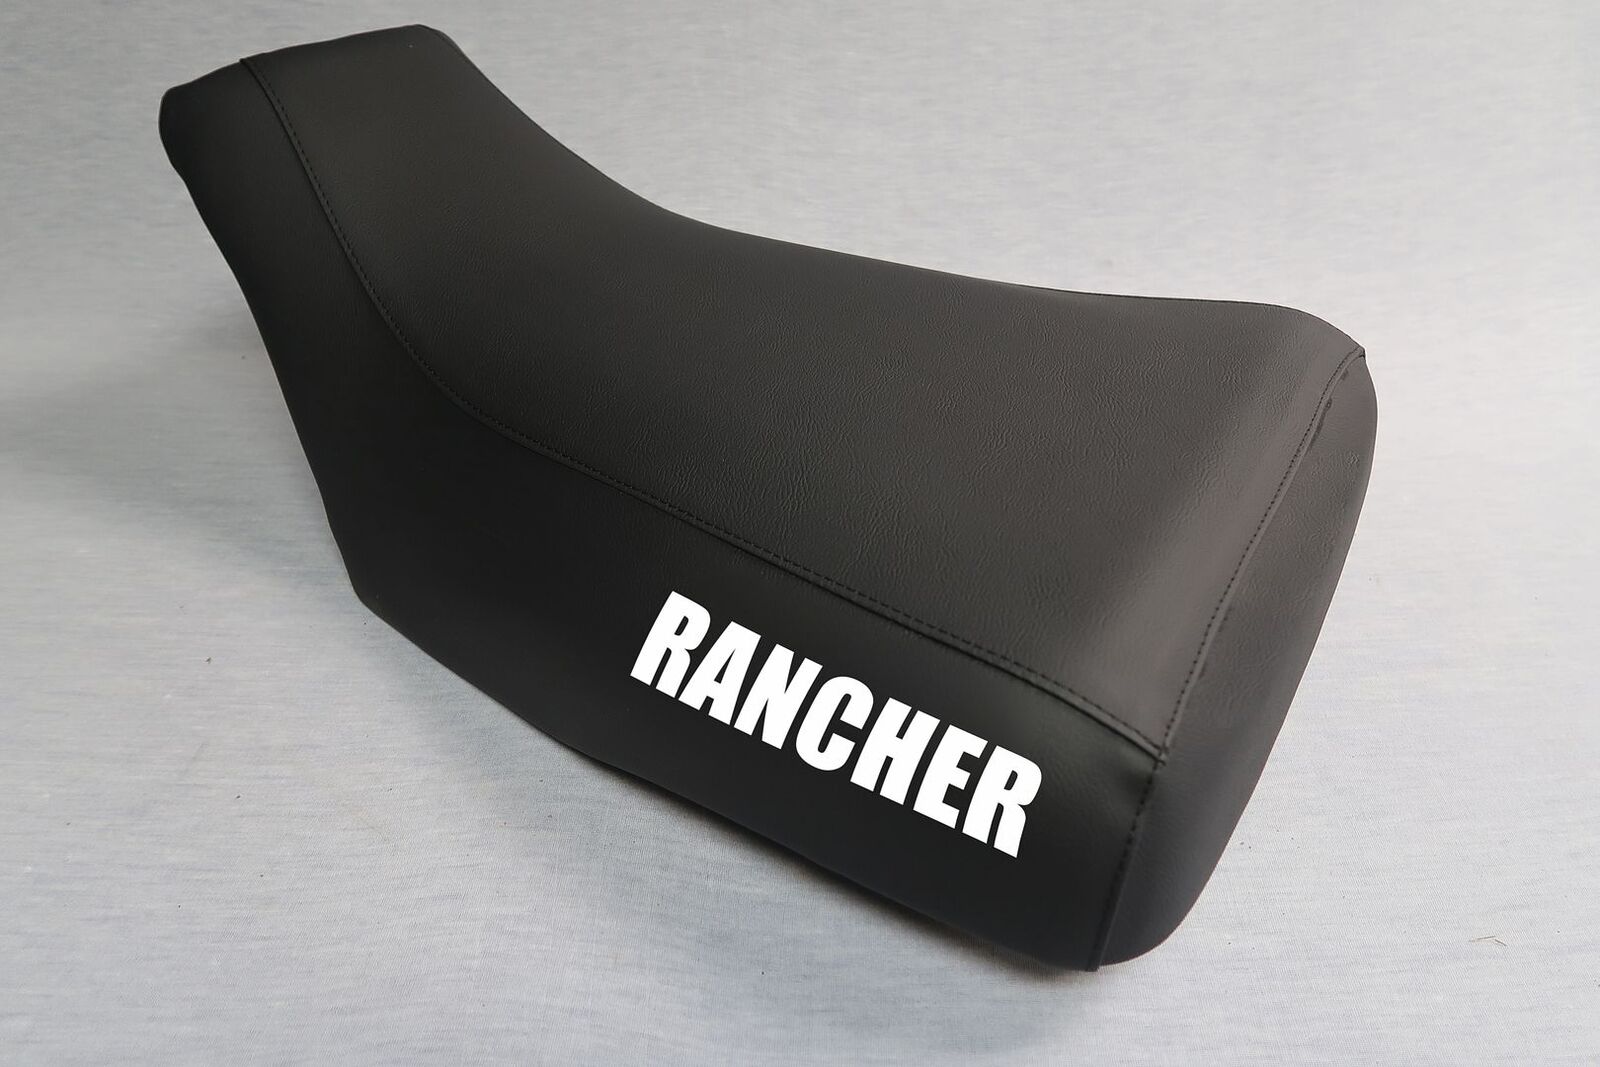 Honda Rancher 400 Seat Cover Fits 2004 To 06  Logo Standard Seat Cover